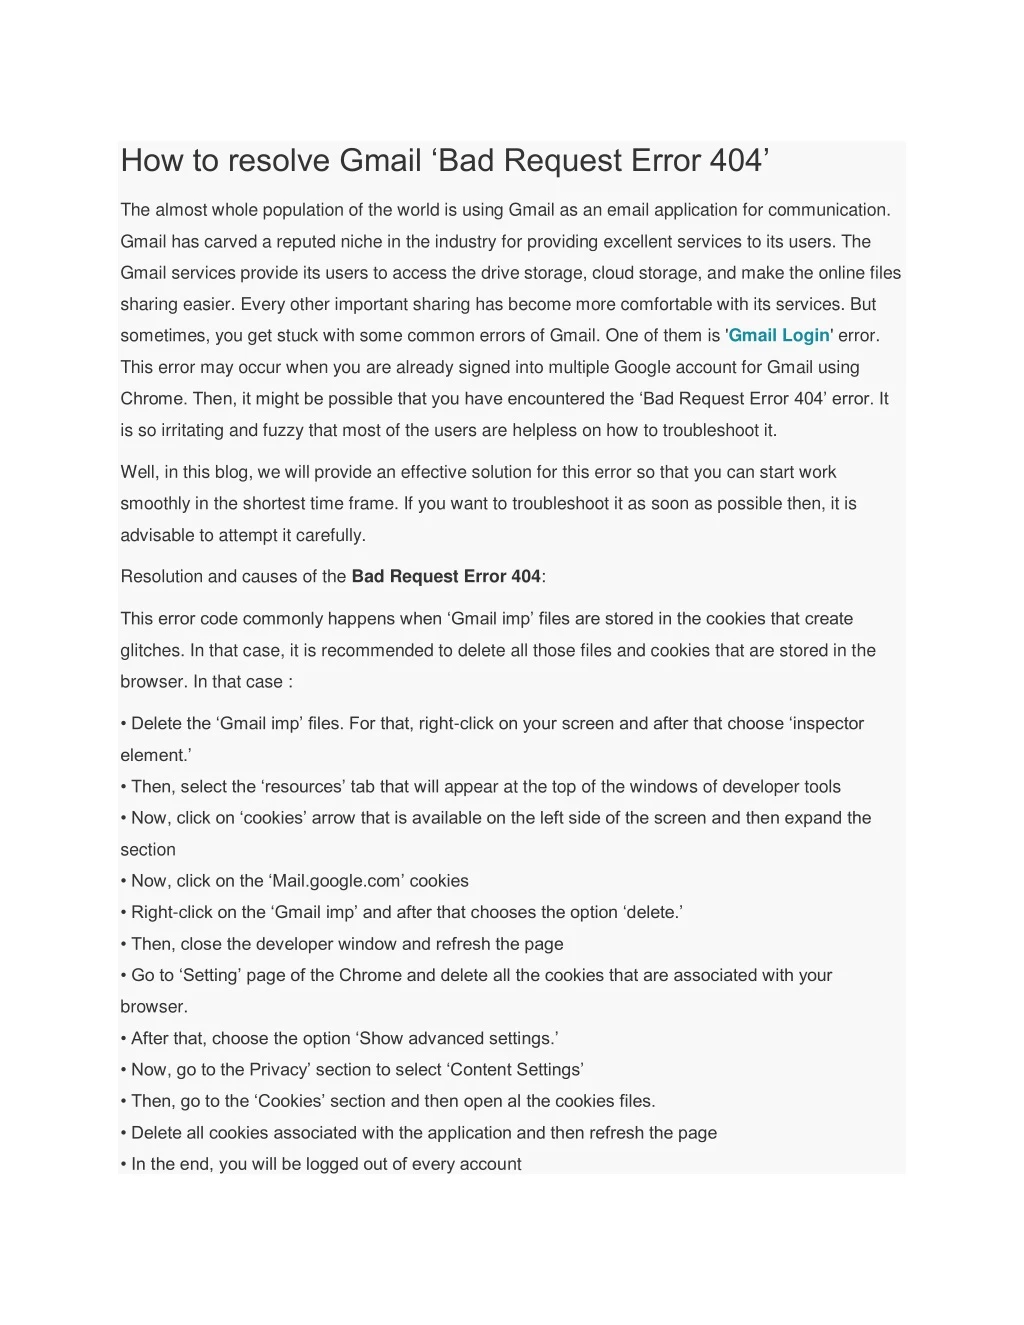 how to resolve gmail bad request error 404